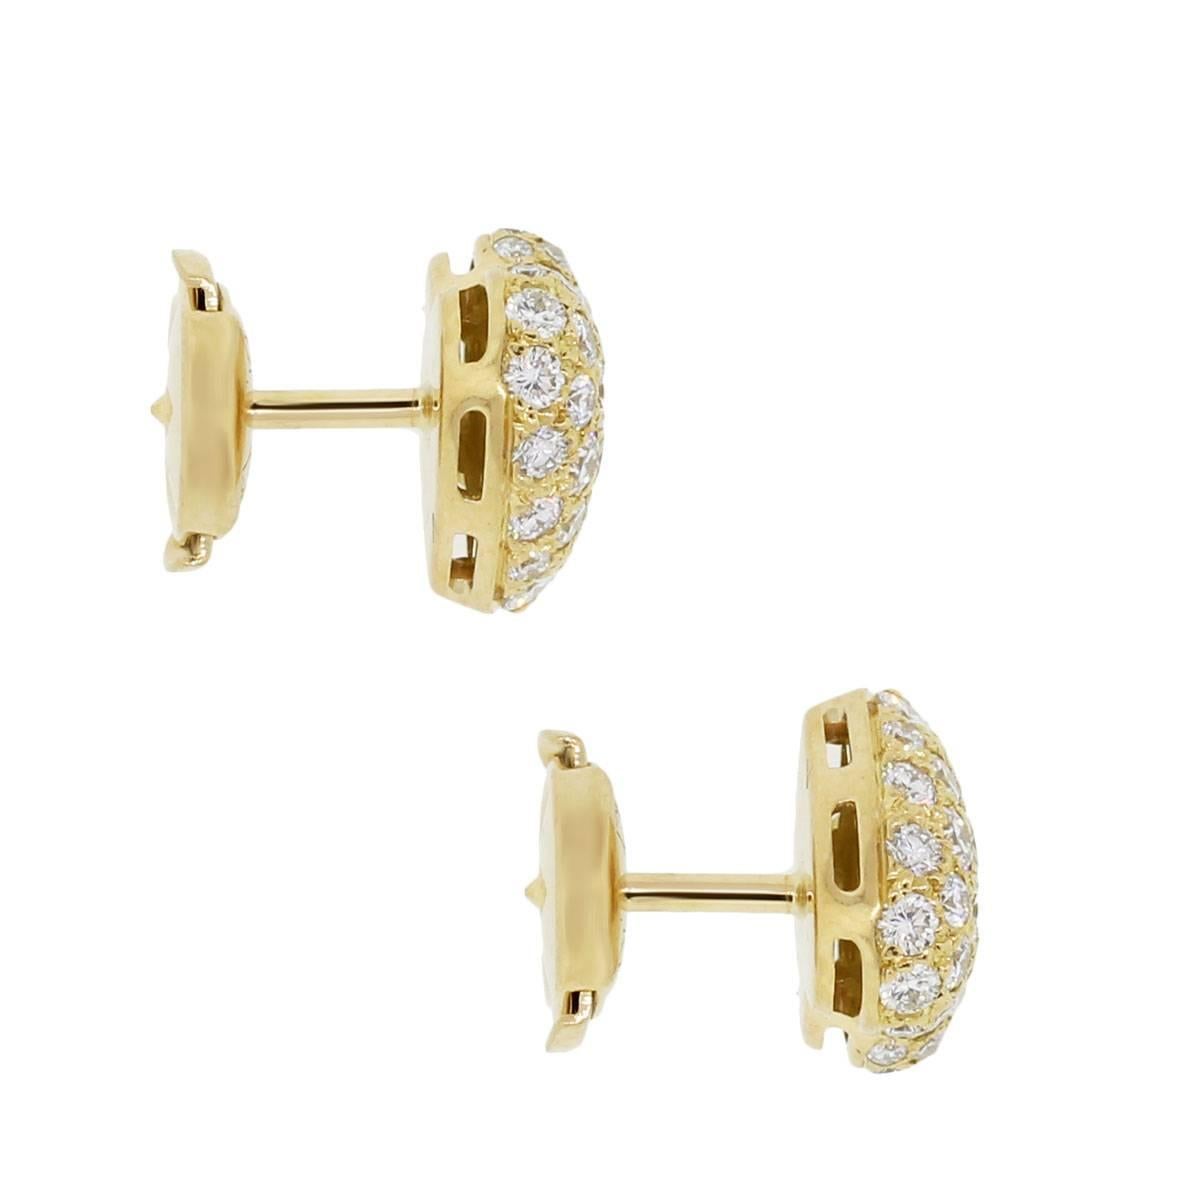 Designer: Cartier
Style: 18k Yellow Gold 1.50ctw Diamond Heart Earrings
Material: 18k Yellow Gold
Diamond Details: Approximately 1.50ctw of round brilliant diamonds, diamonds are F/G in color and VS in clarity.
Measurements: 0.39